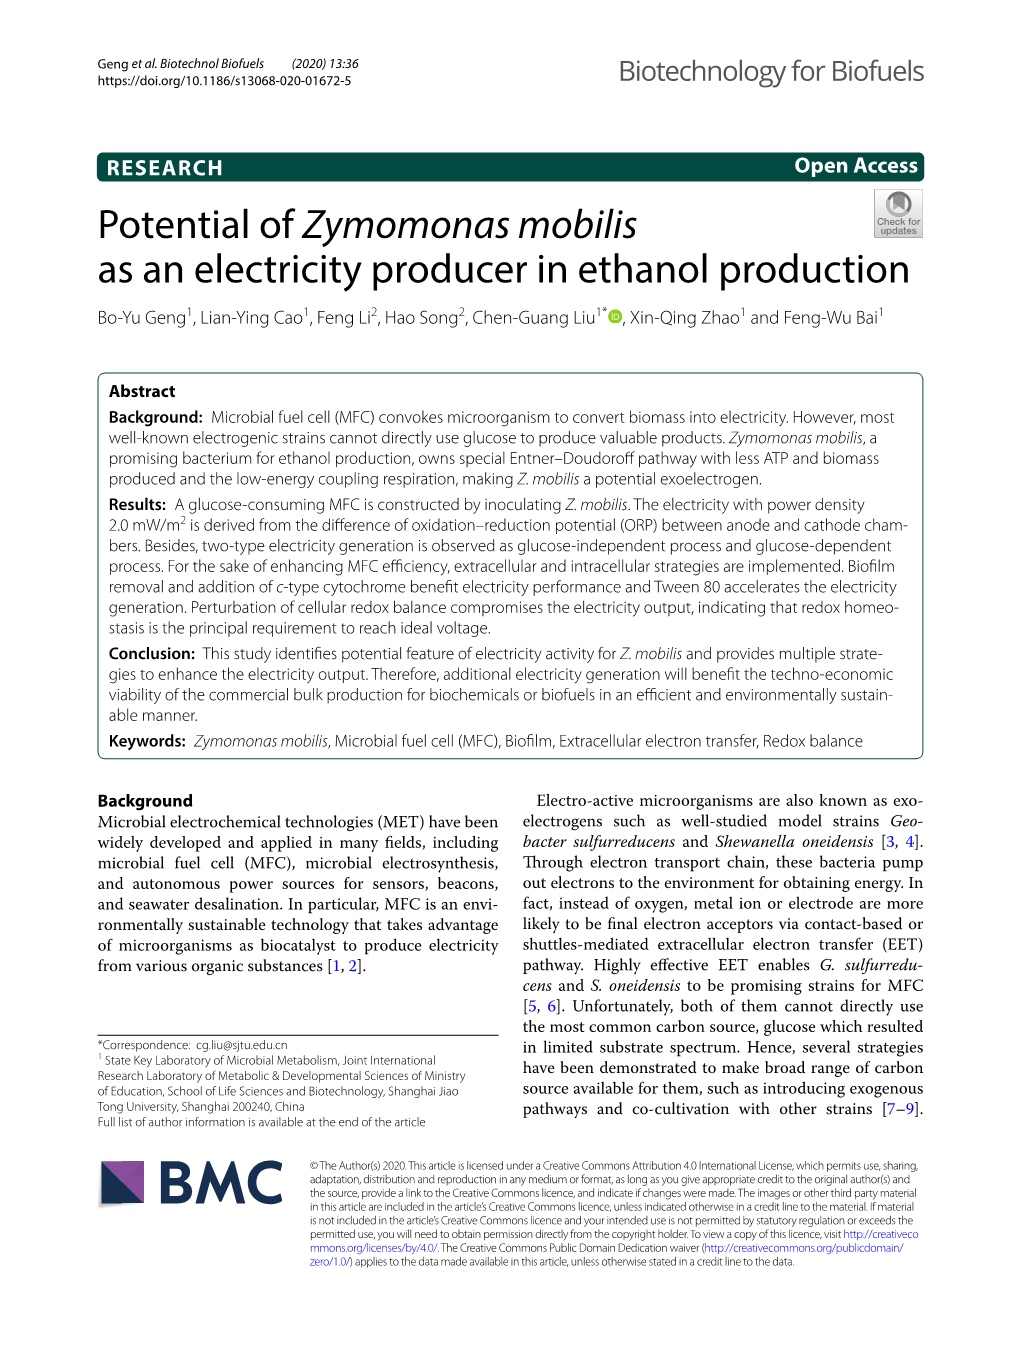 Potential of Zymomonas Mobilis As an Electricity Producer in Ethanol